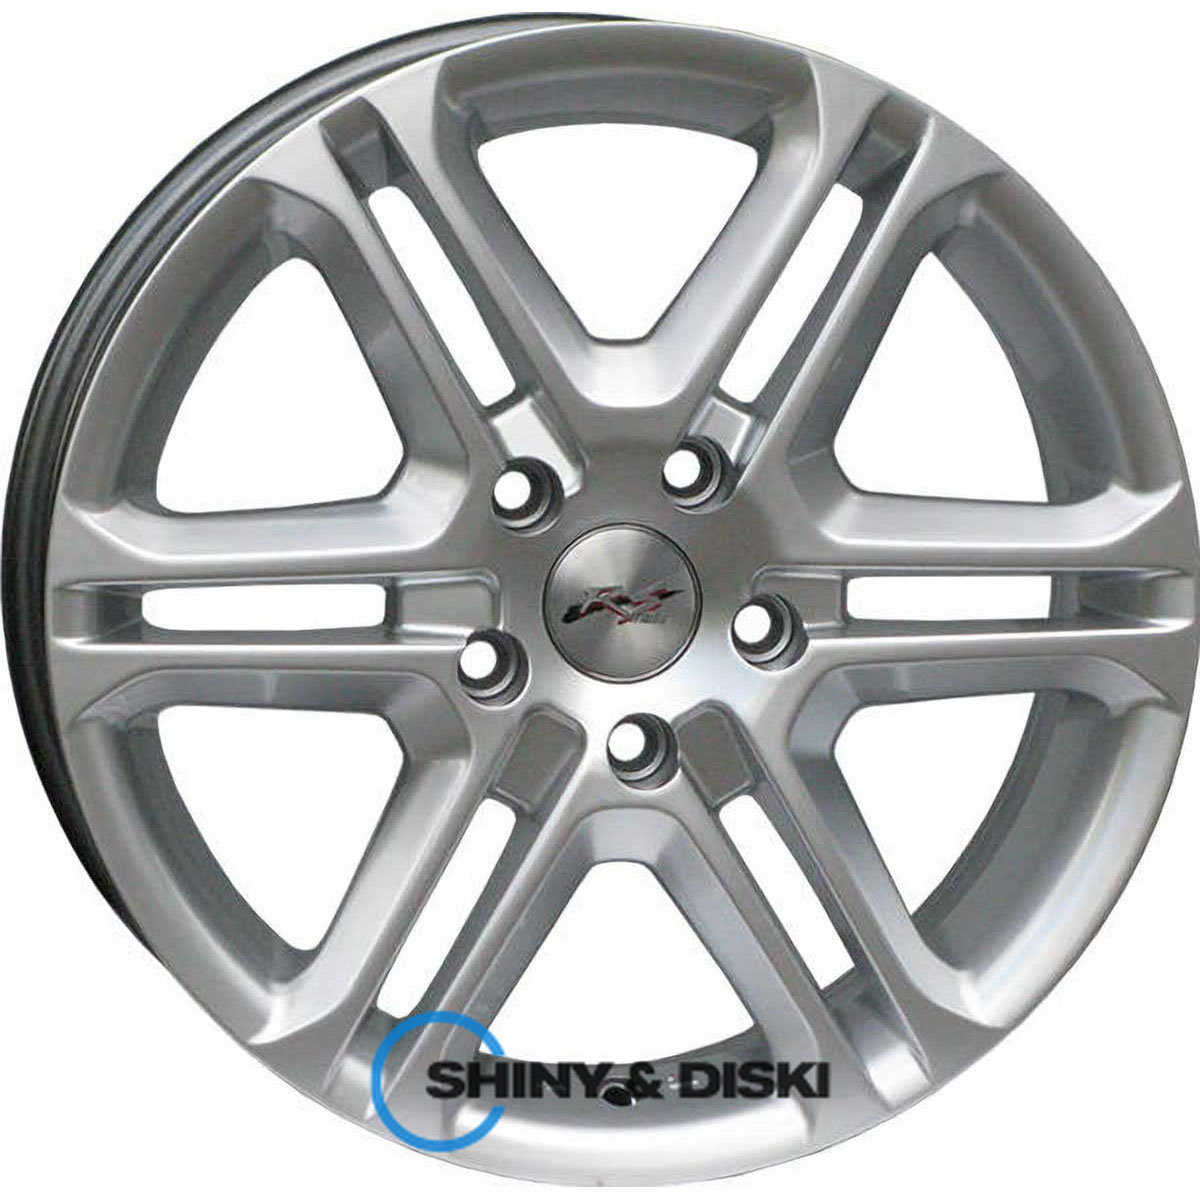 rs tuning 789 hs r15 w6.5 pcd4x108 et25 dia65.1